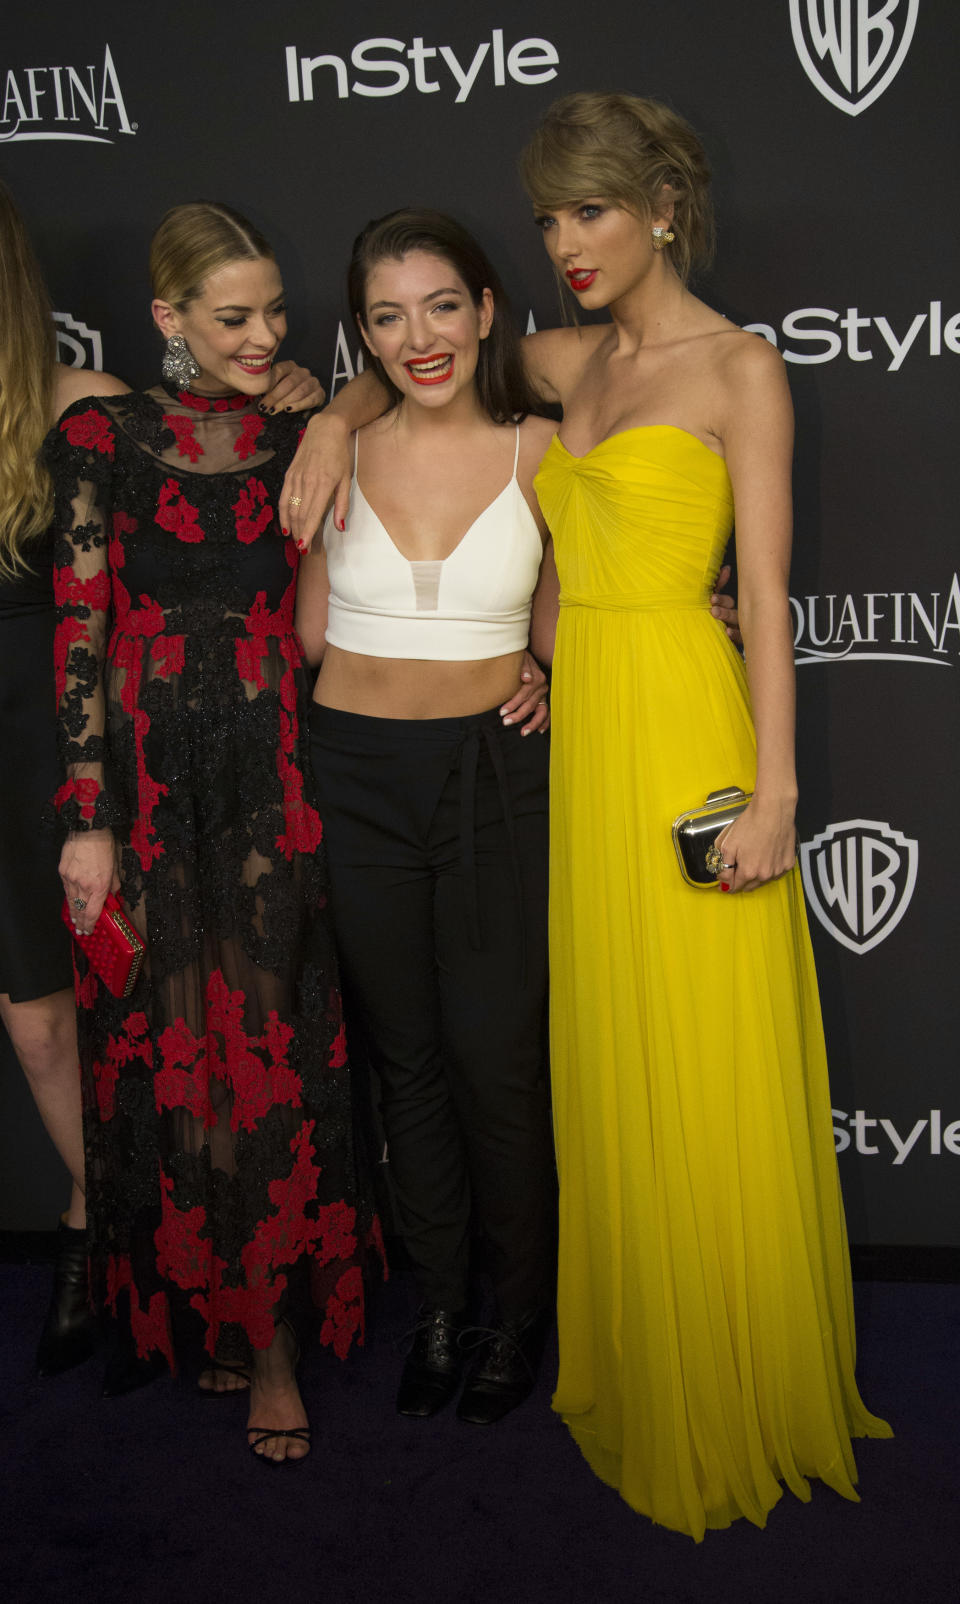 Actress Jaime King (L), recording artists Lorde (C) and Taylor Swift pose at the 16th annual InStyle and Warner Bros. party after the 72nd annual Golden Globe Awards in Beverly Hills, California January 11, 2015. REUTERS/Mario Anzuoni  (UNITED STATES - Tags: ENTERTAINMENT) (GOLDENGLOBES-PARTIES)